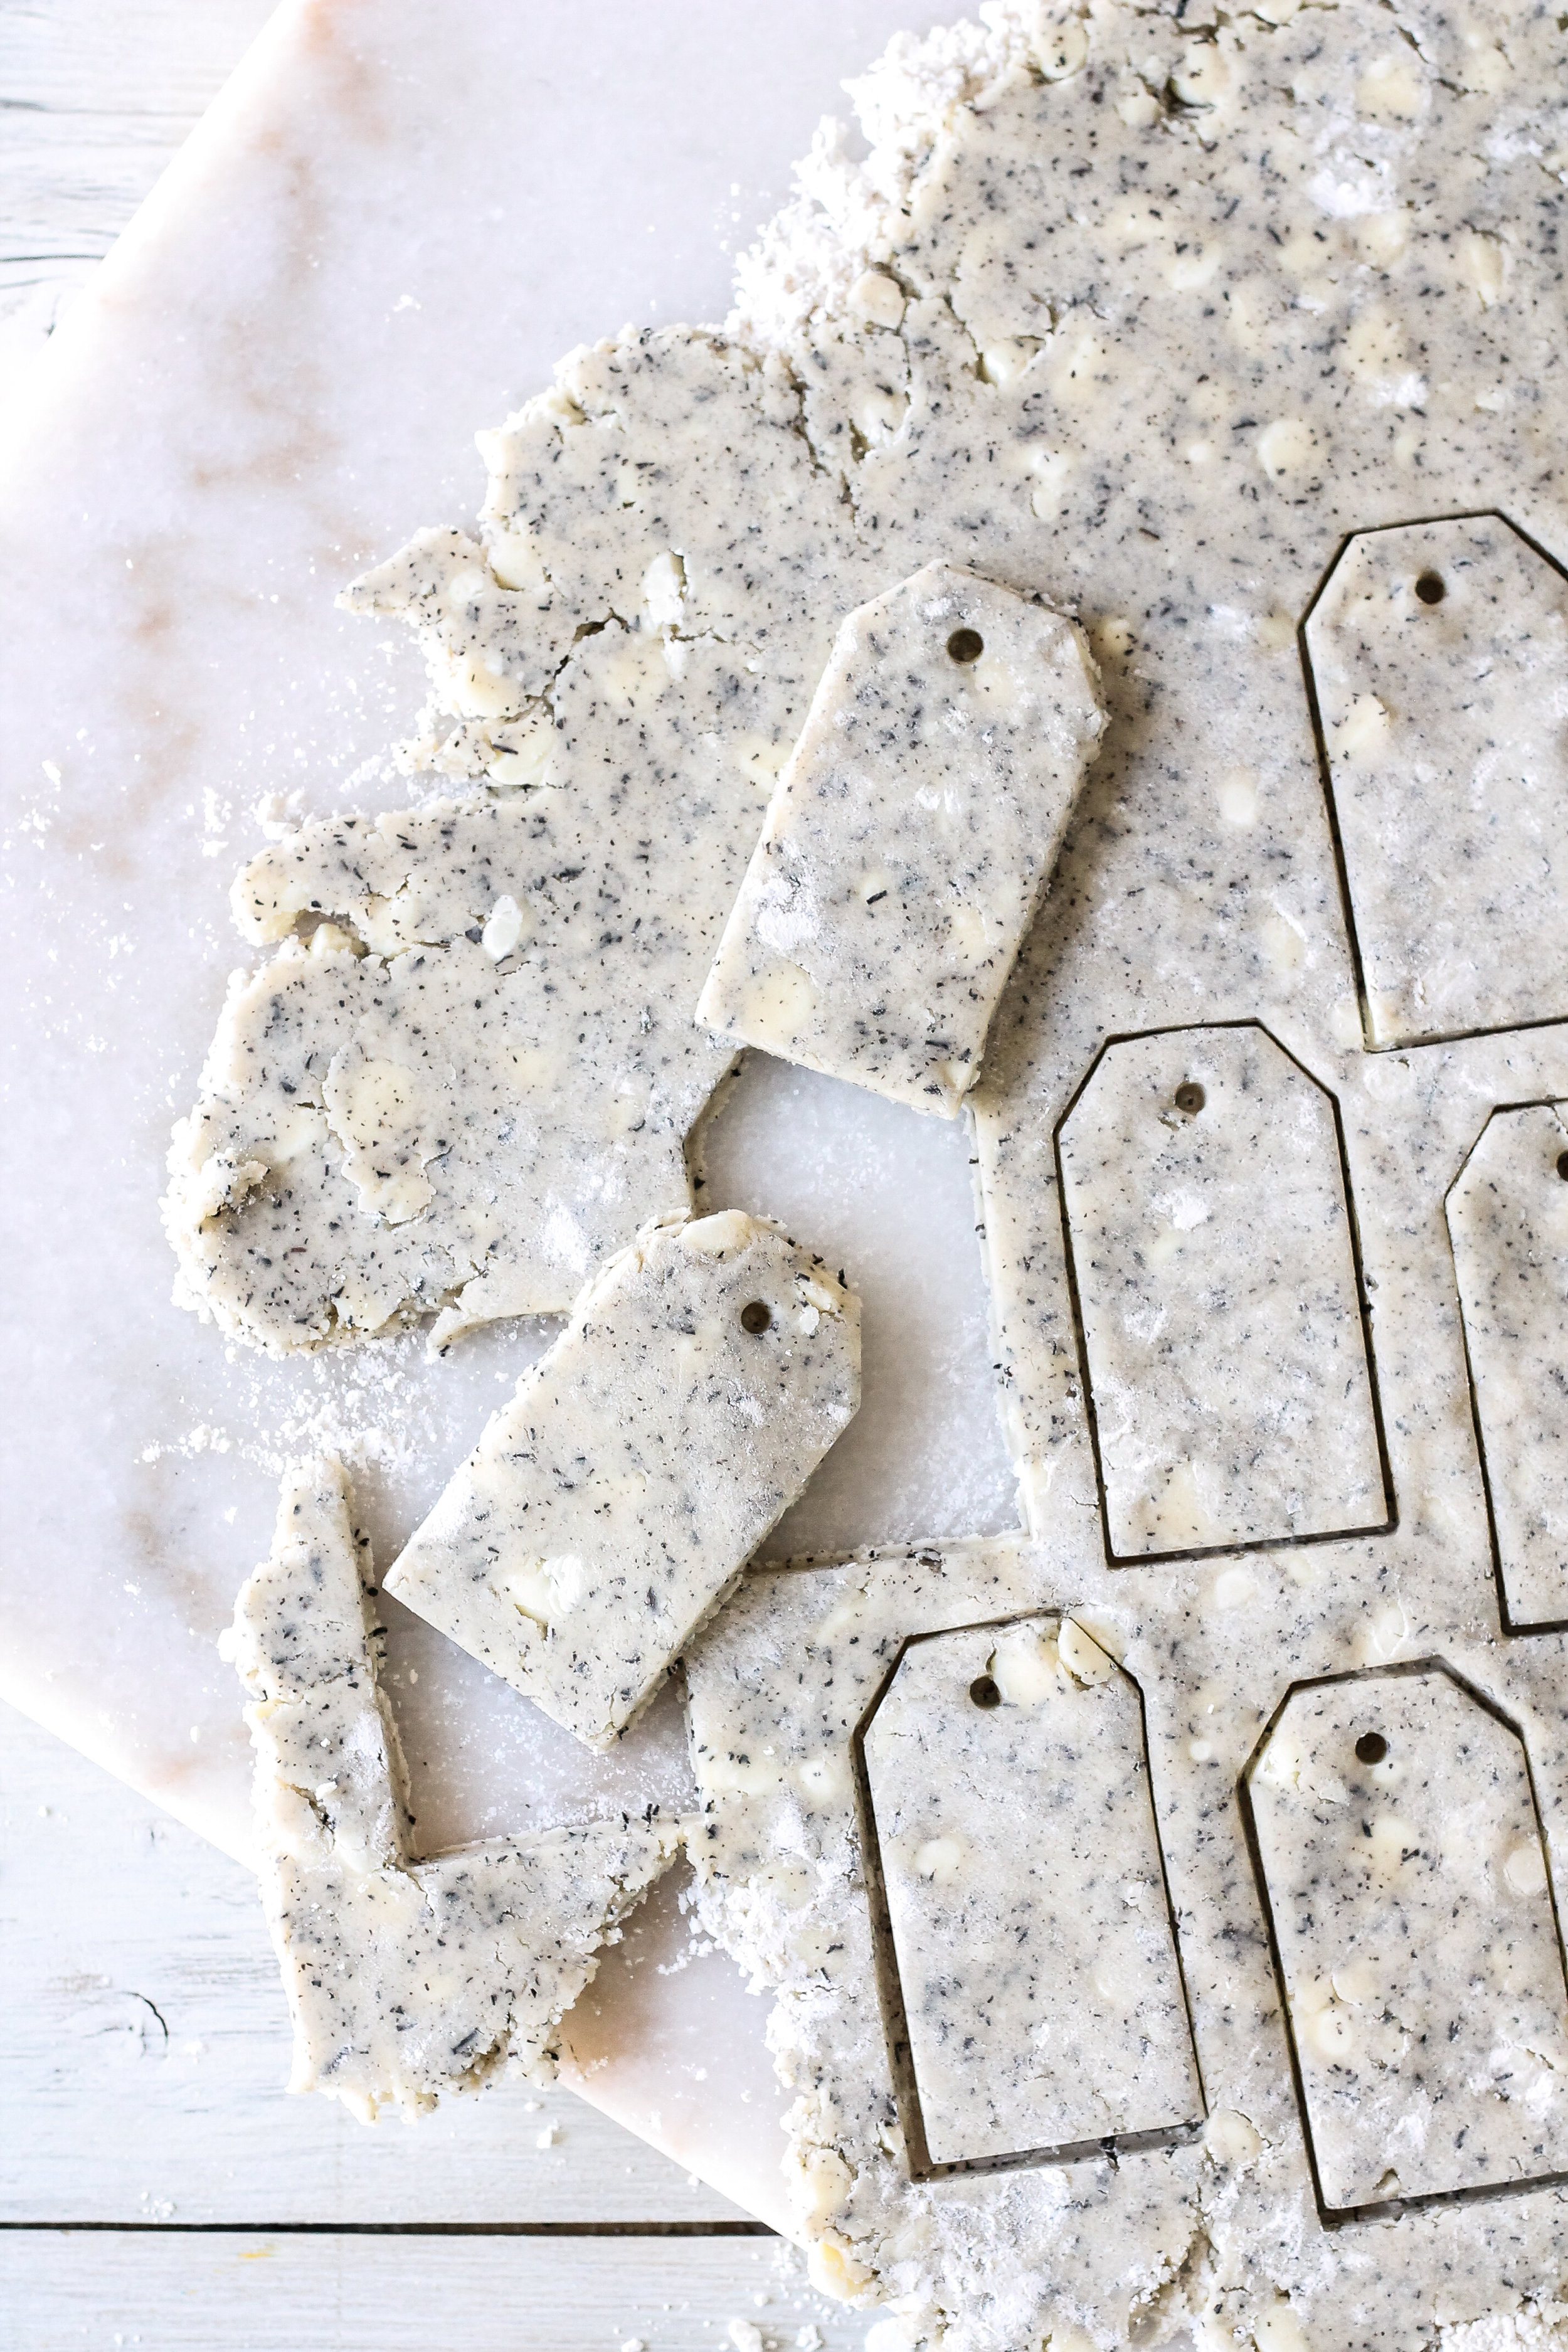 These adorable White Chocolate &amp; Earl Grey Shortbread Tea Cookies make the perfect way to welcome the delicate flavors of spring!  Find the recipe on www.pedanticfoodie.com!